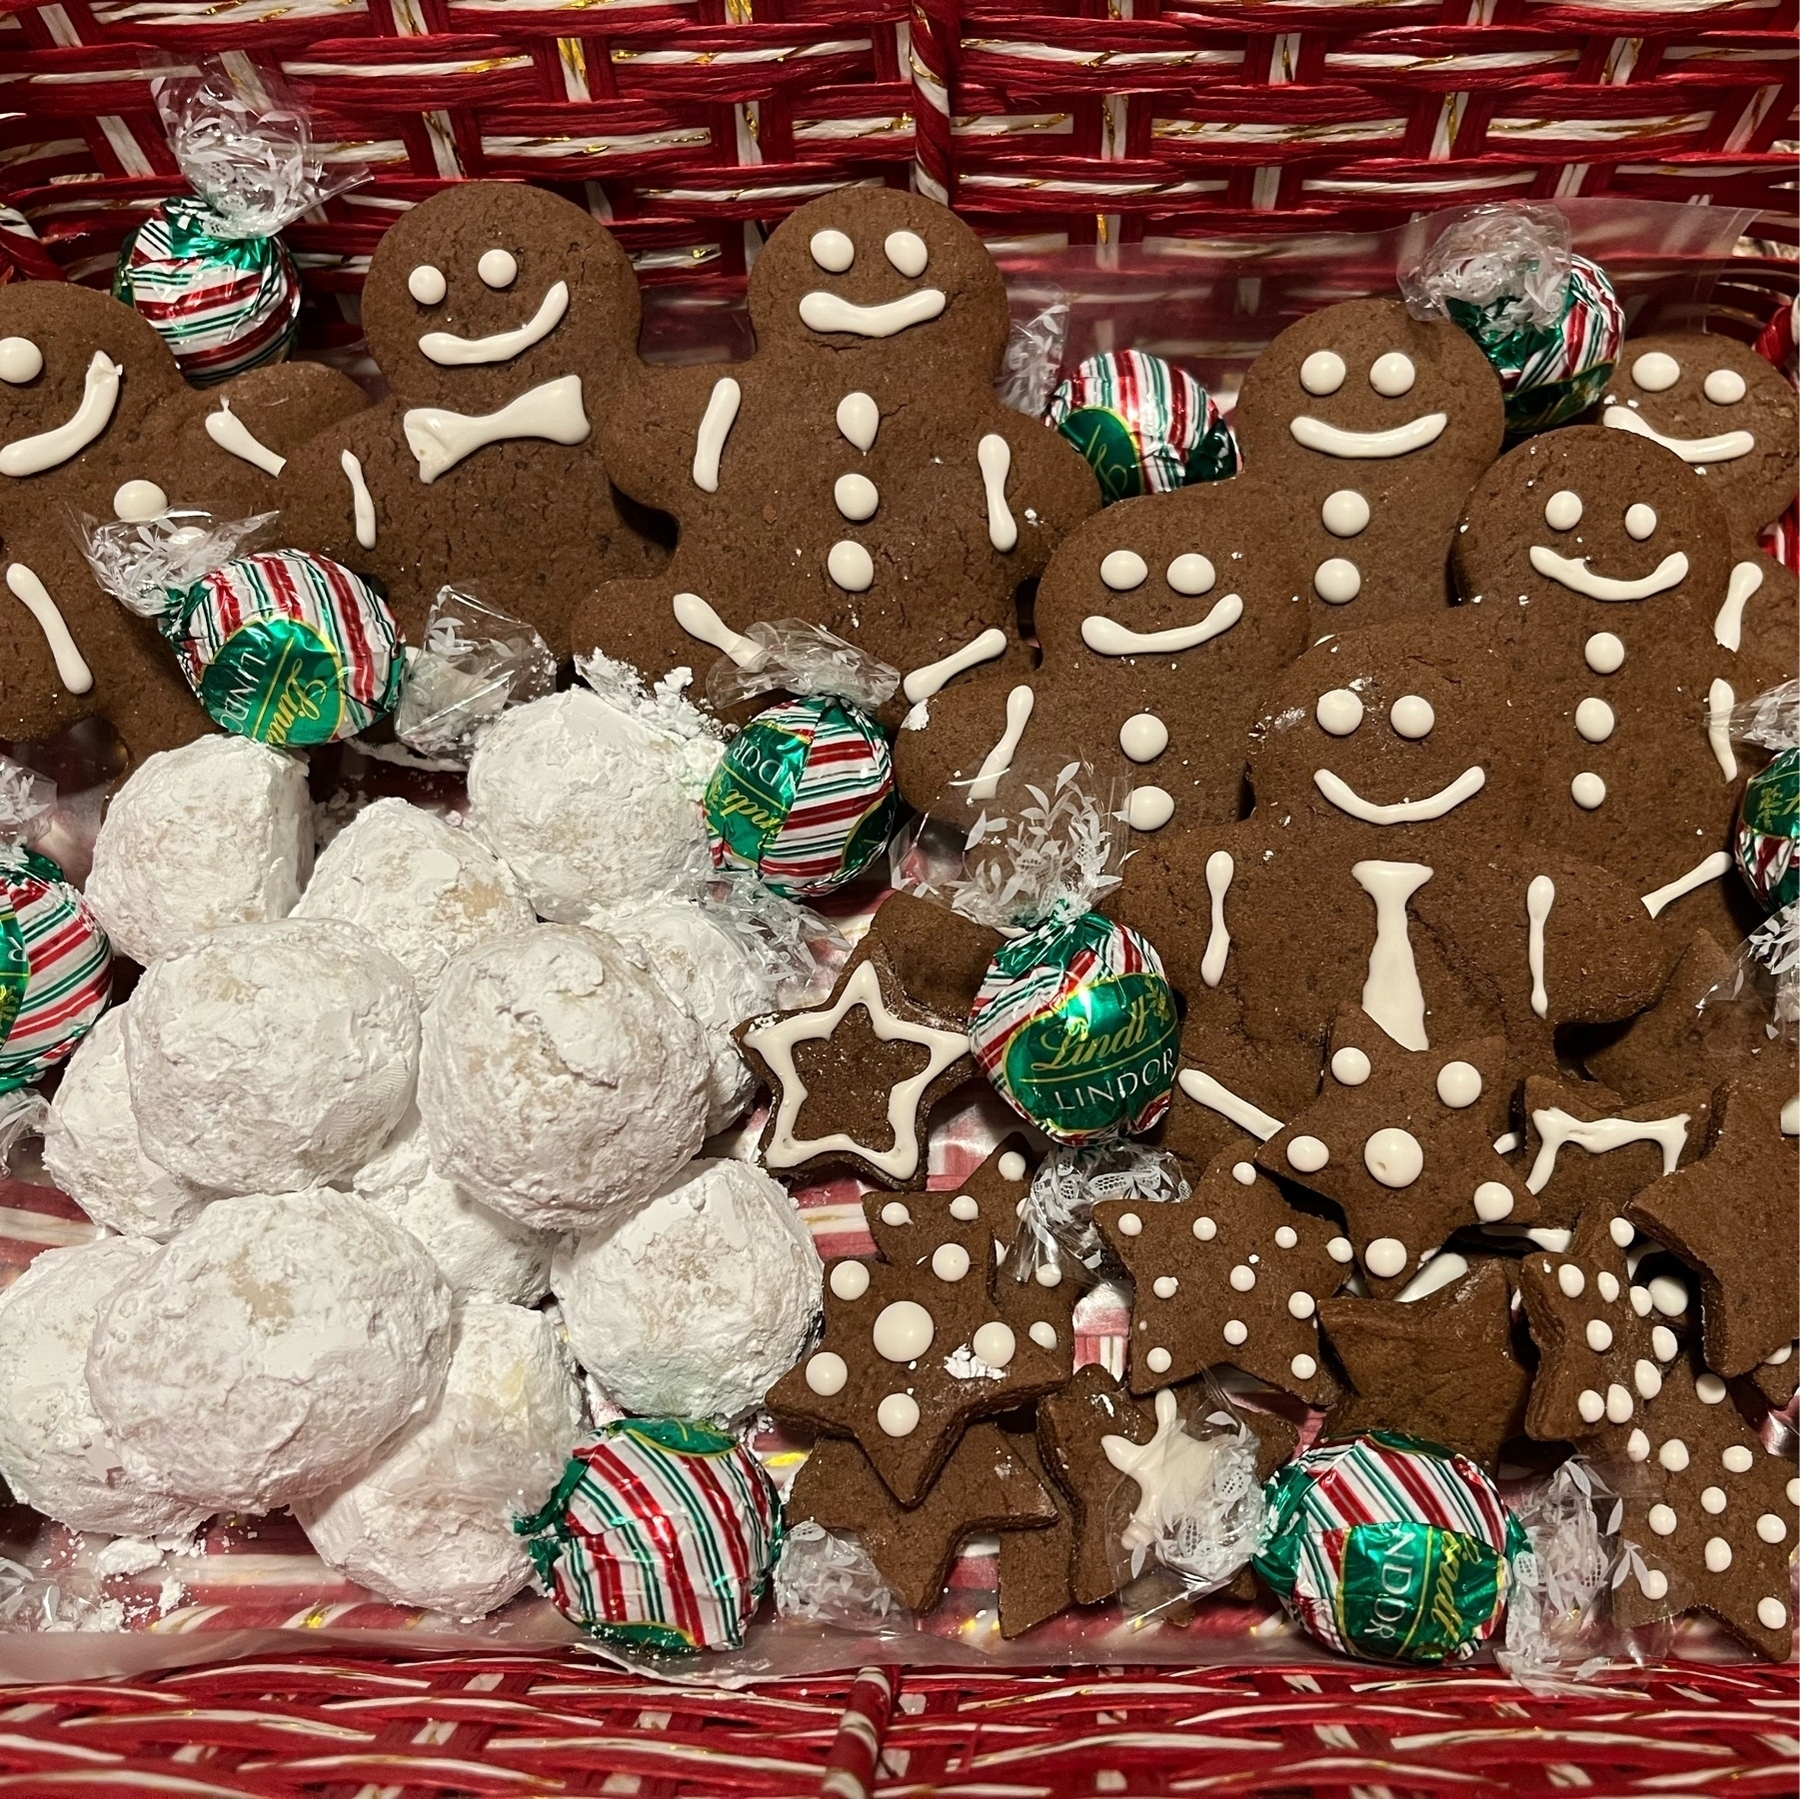 ginger bread people with snow balls, Lindtt chocolayes, all in a red and white basket.